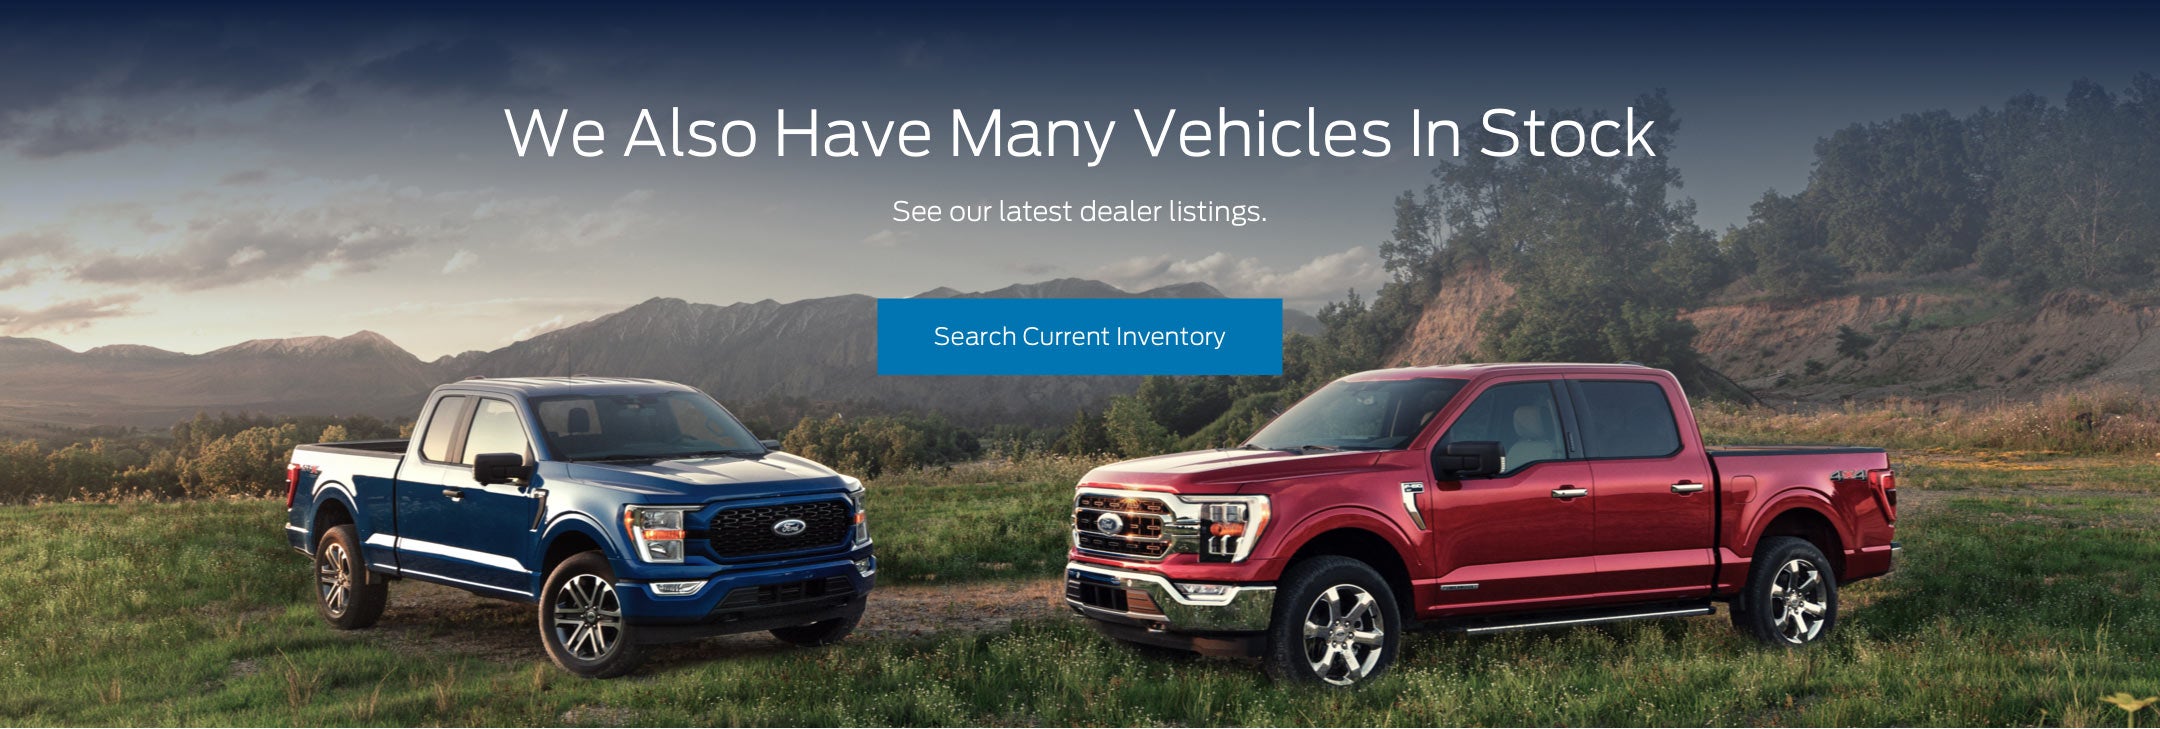 Ford vehicles in stock | Bill Knight Ford in Tulsa OK